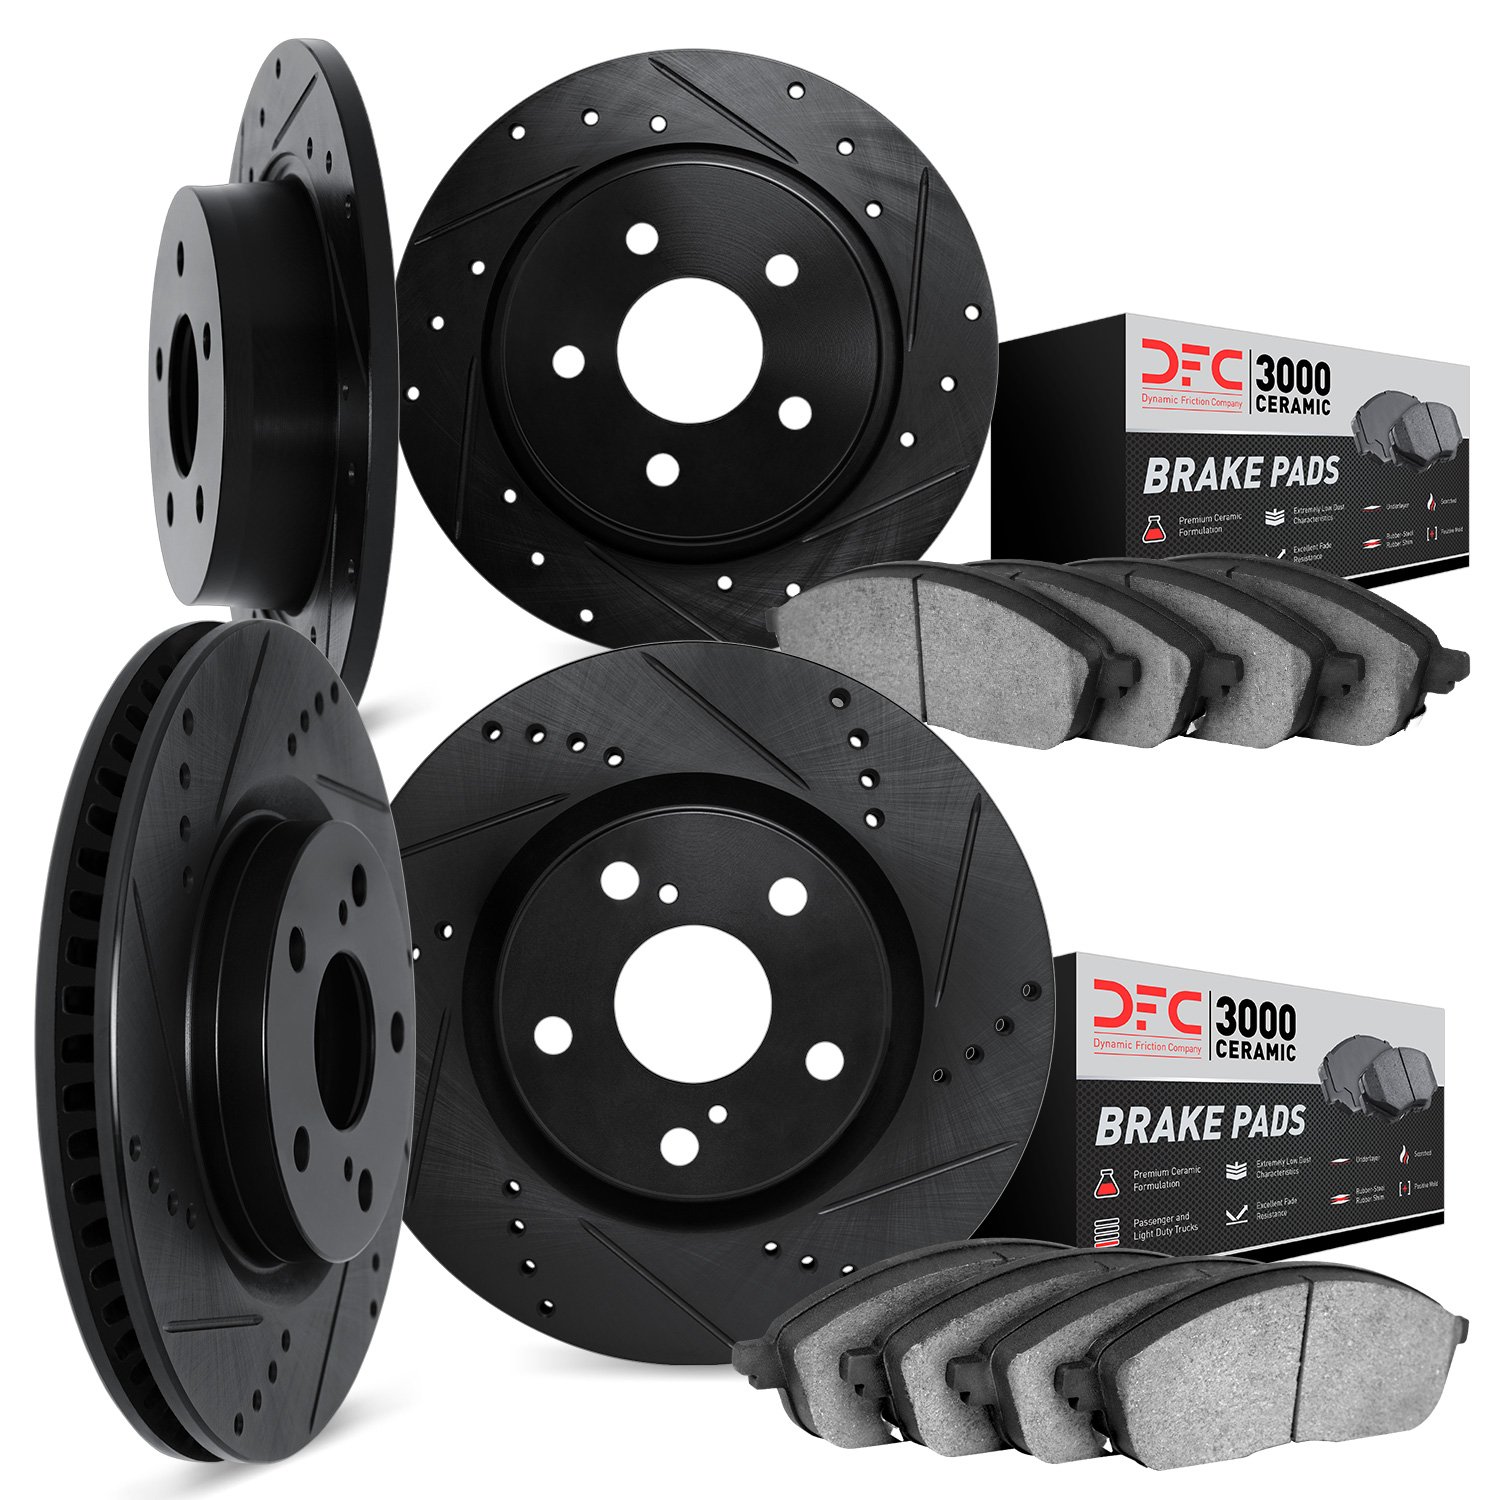 8304-59077 Drilled/Slotted Brake Rotors with 3000-Series Ceramic Brake Pads Kit [Black], Fits Select Acura/Honda, Position: Fron